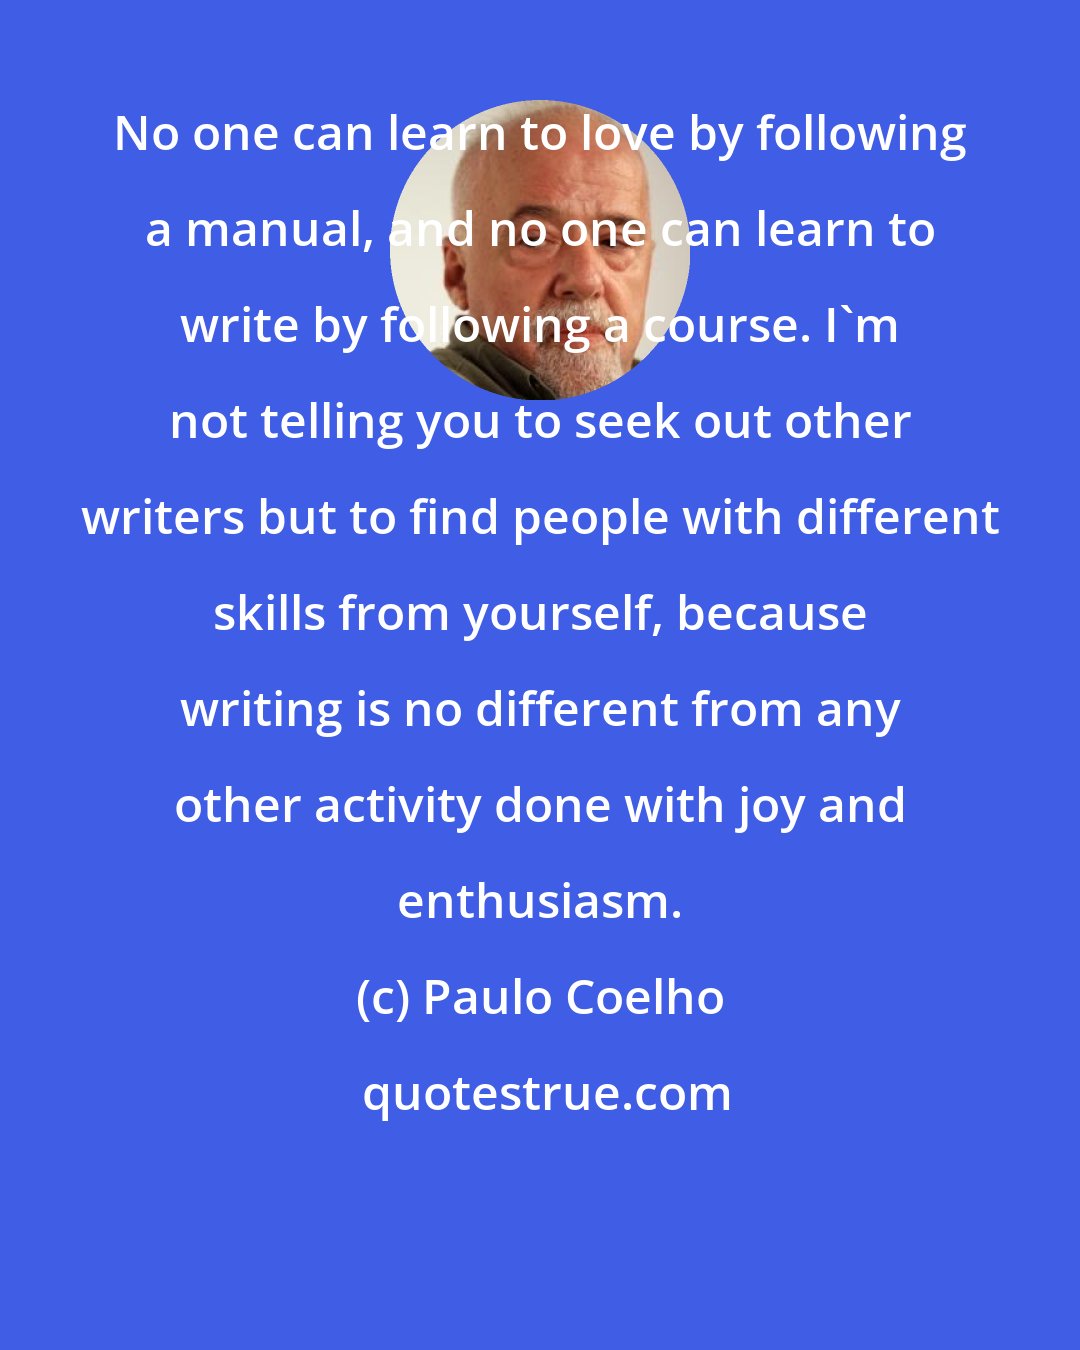 Paulo Coelho: No one can learn to love by following a manual, and no one can learn to write by following a course. I'm not telling you to seek out other writers but to find people with different skills from yourself, because writing is no different from any other activity done with joy and enthusiasm.